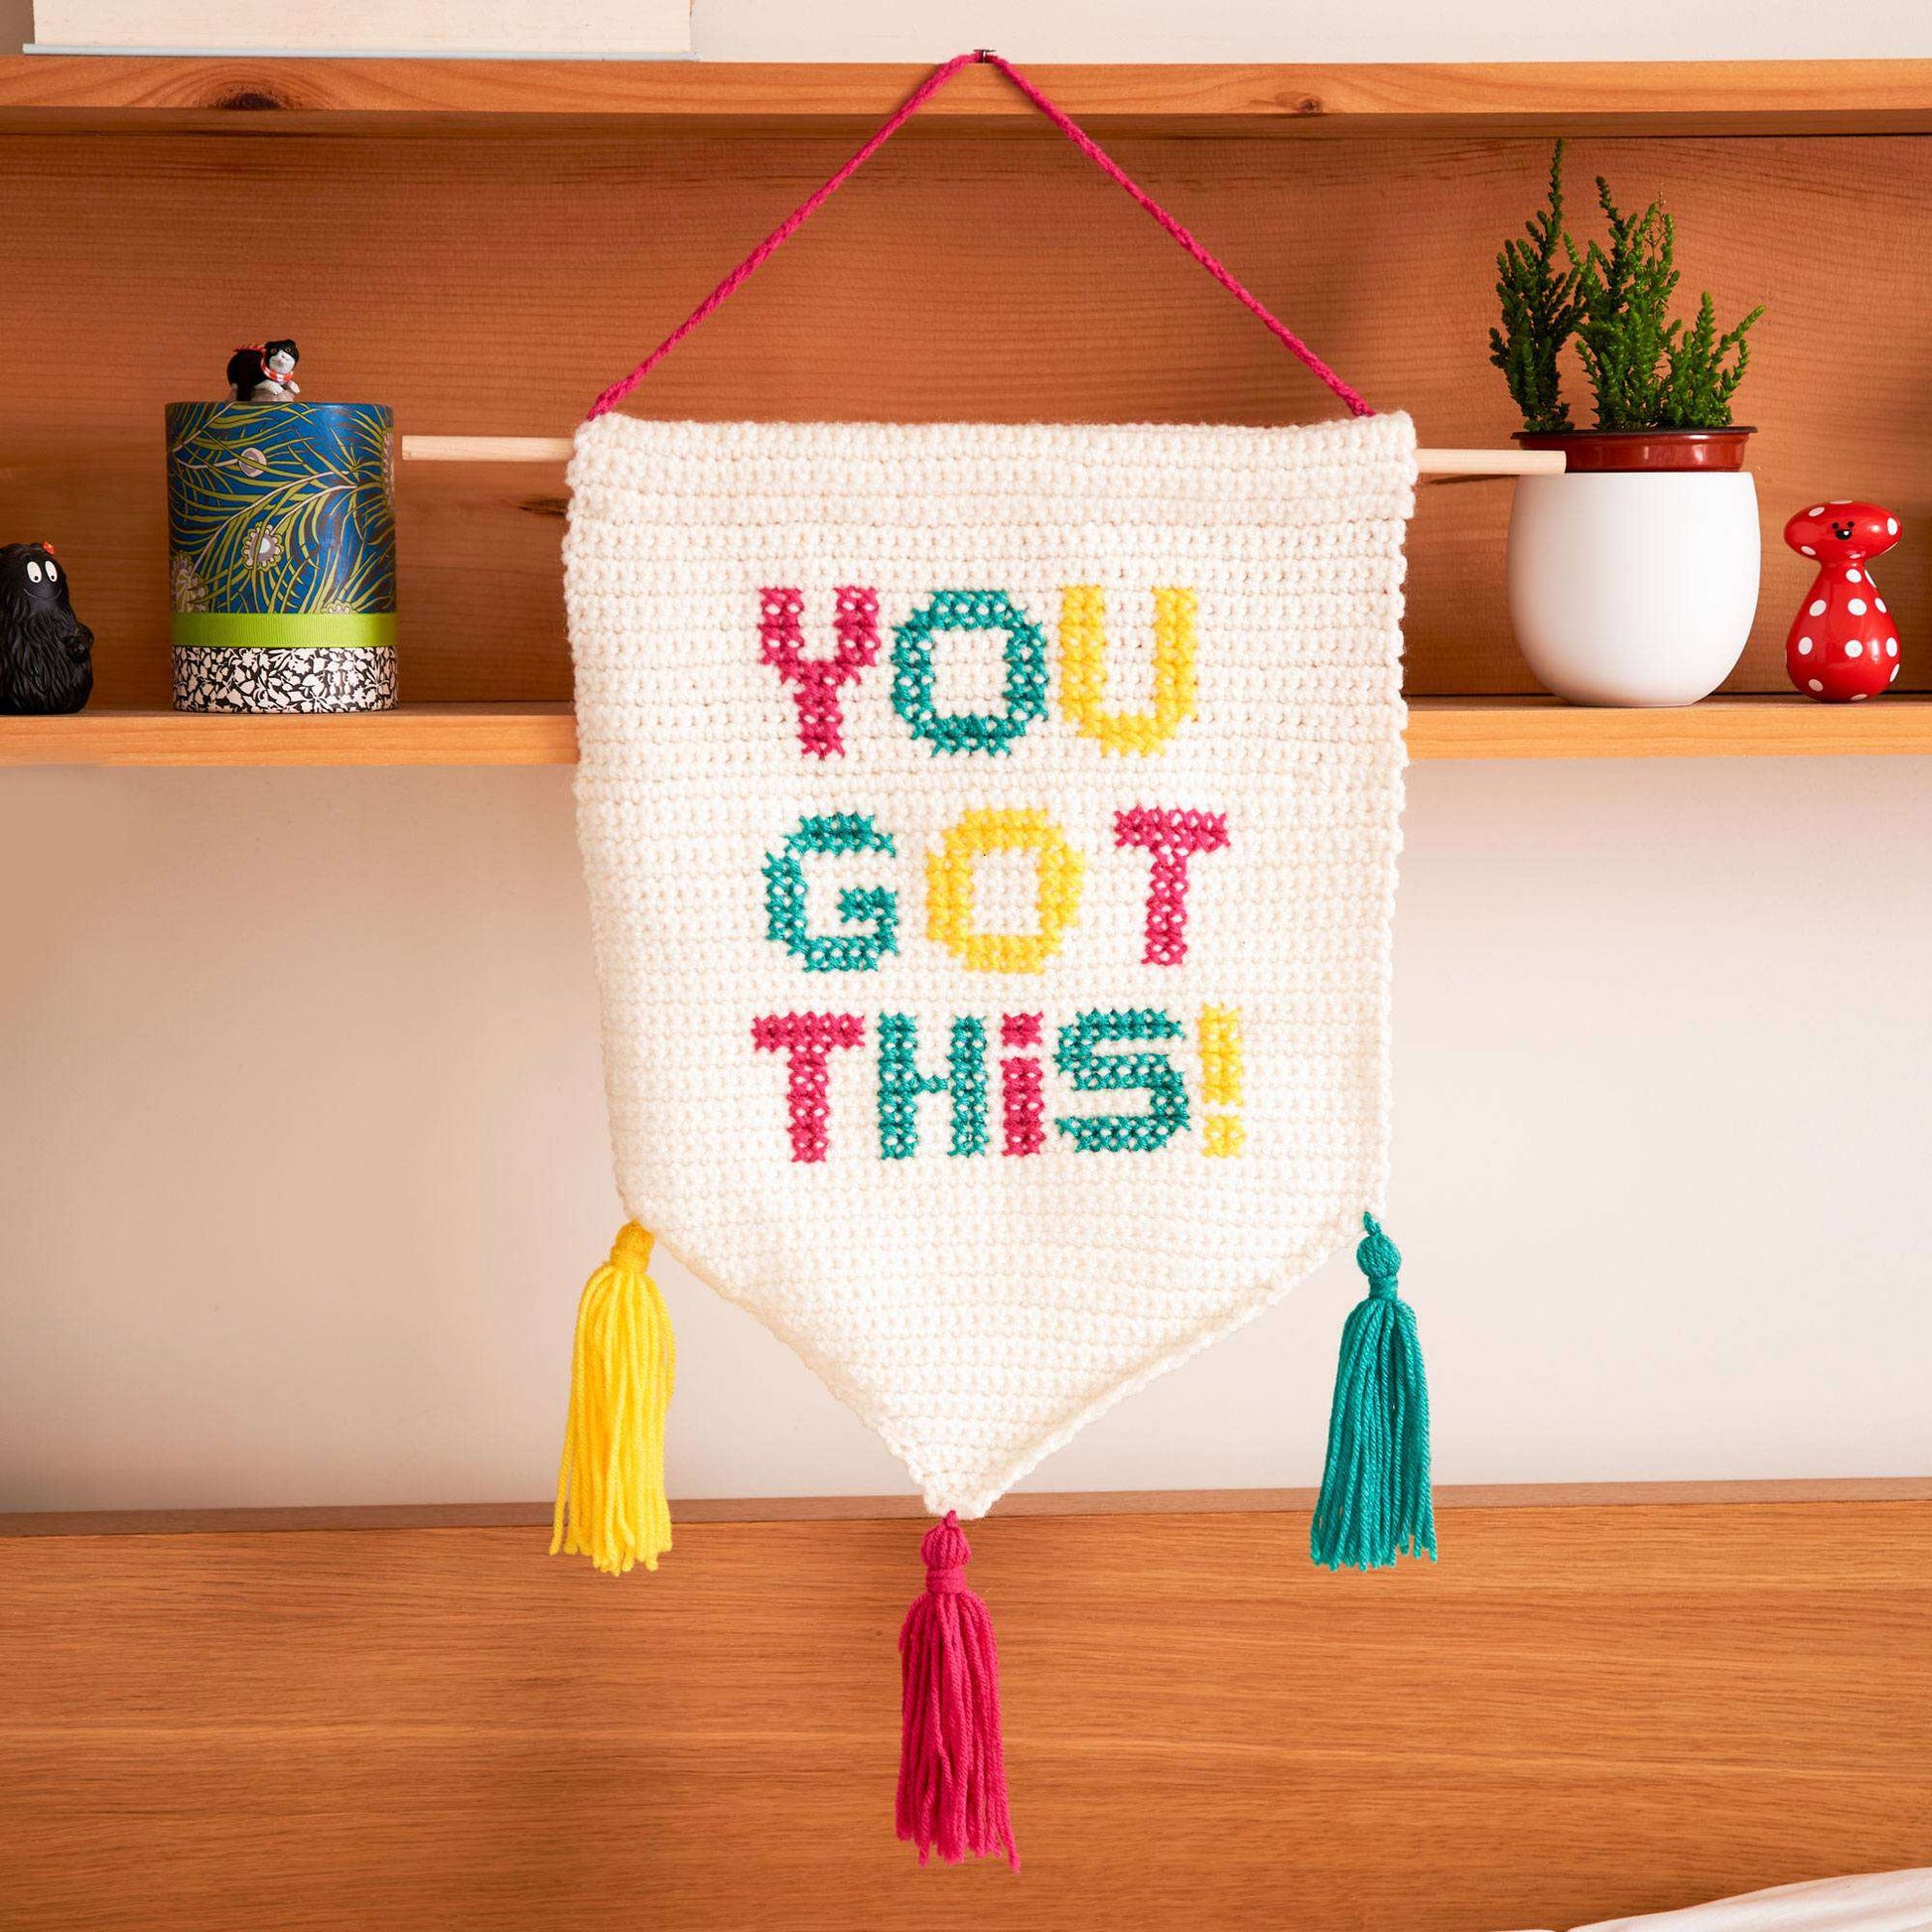 Free Red Heart “You Got This” Motivational Crochet Banner Pattern